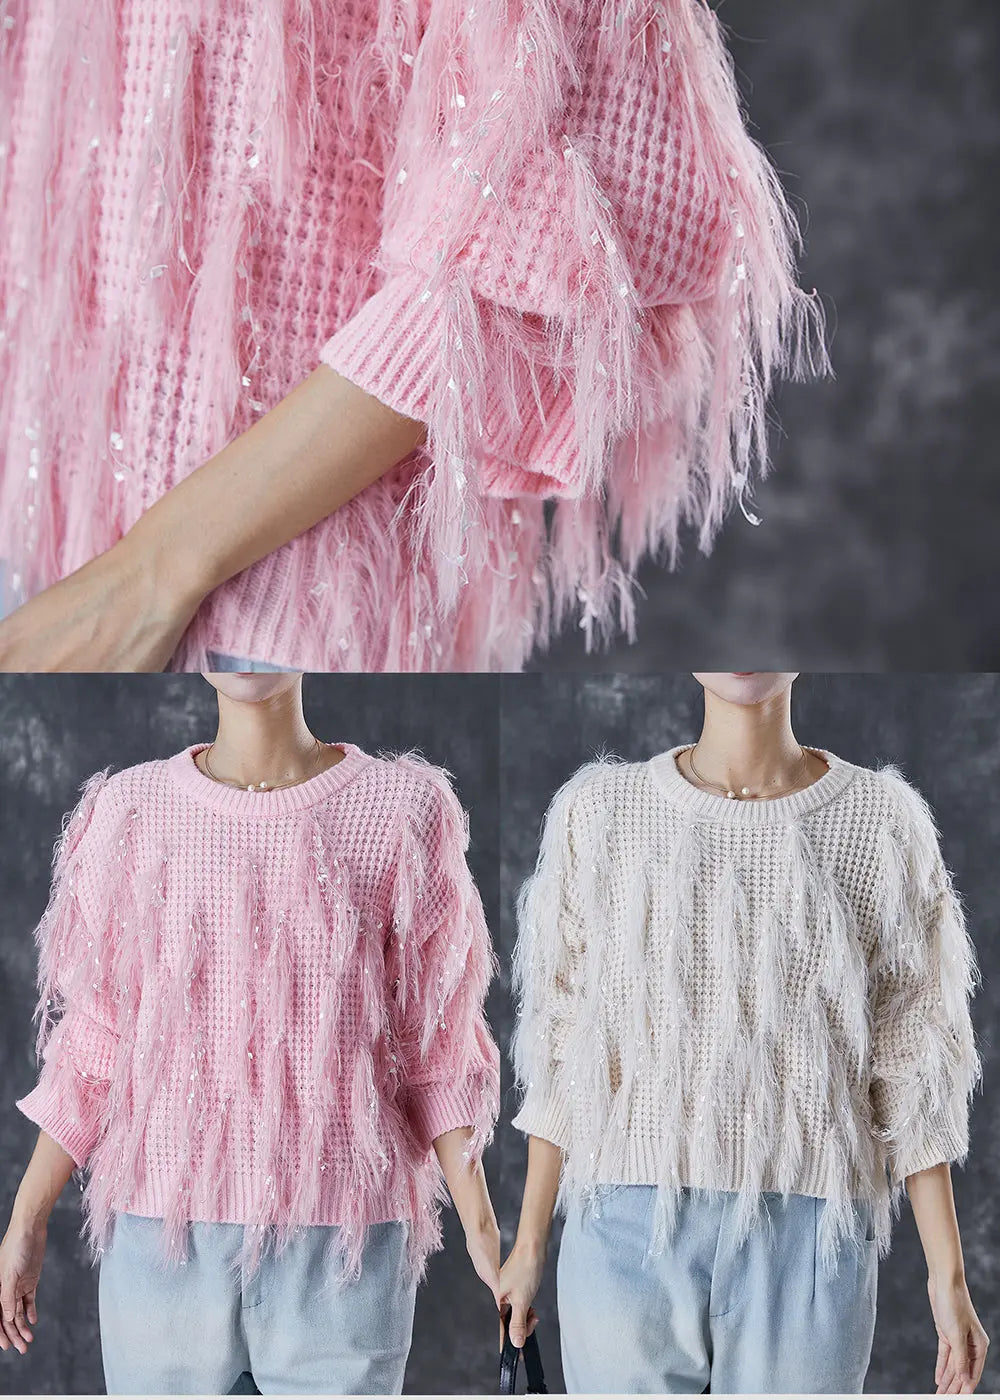 White Thick Knit Sweaters Tasseled Sequins Winter Ada Fashion